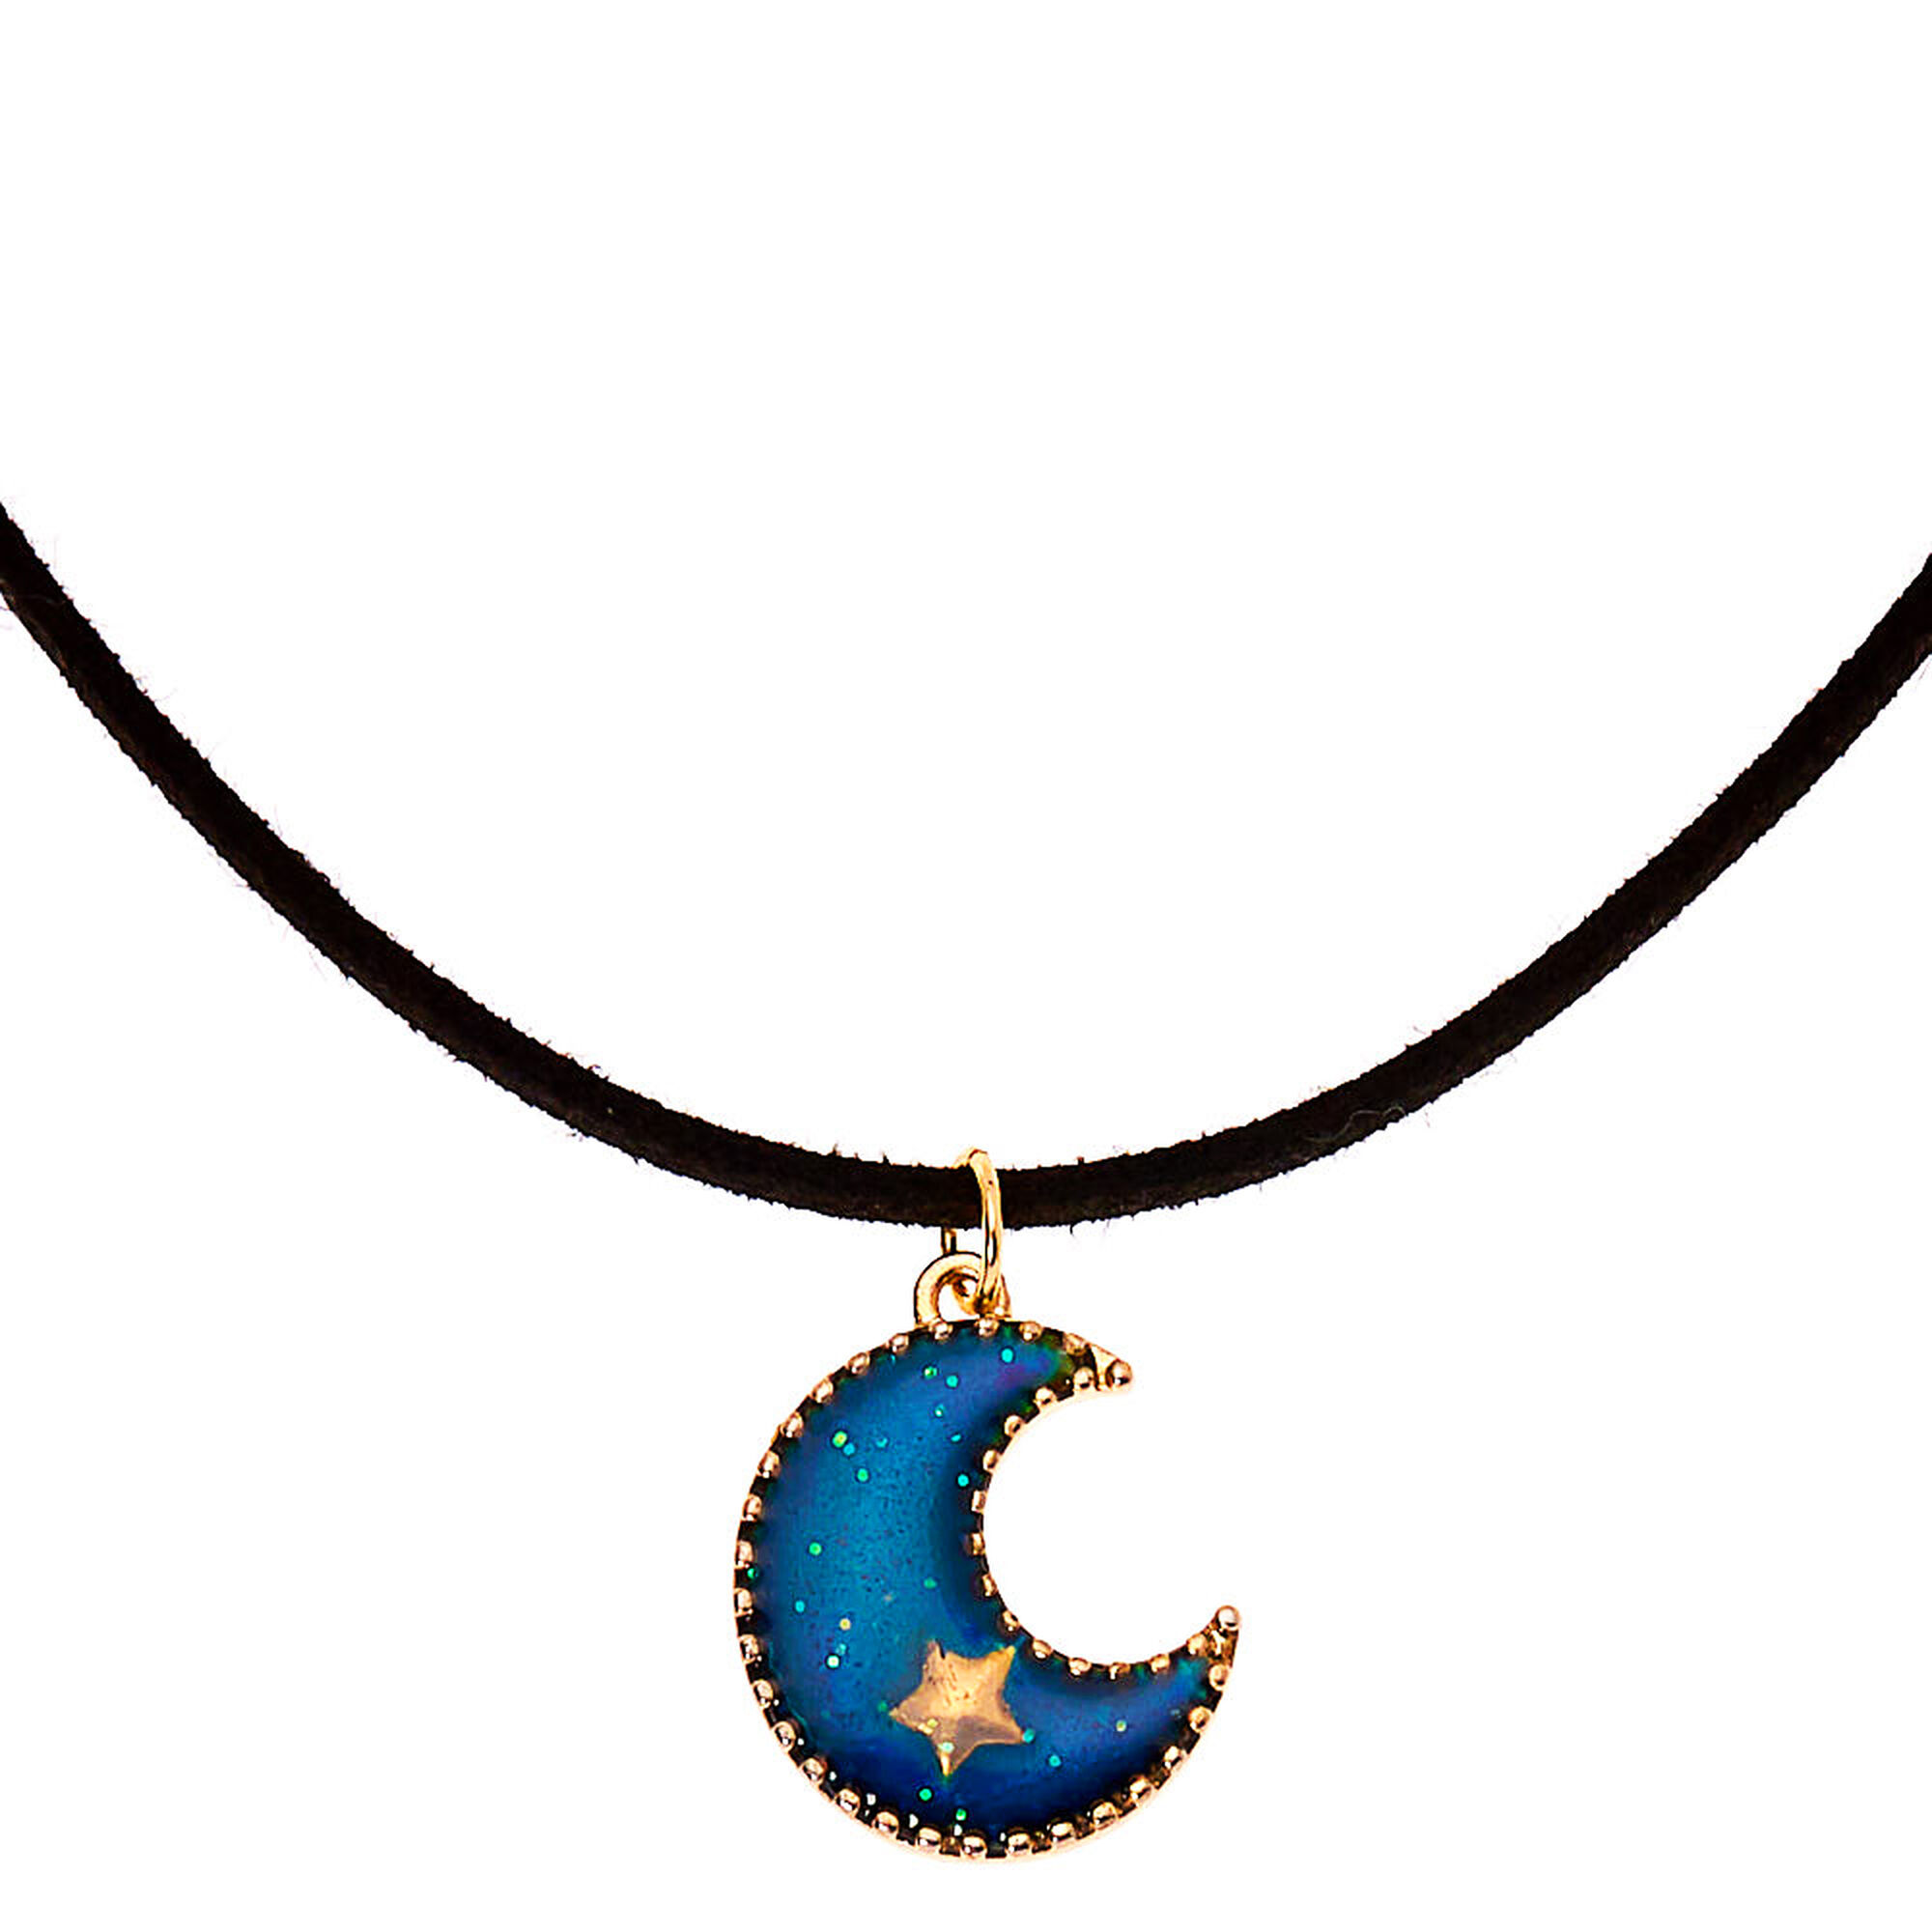 View Claires Crescent Moon Mood Pendant Necklace Gold information